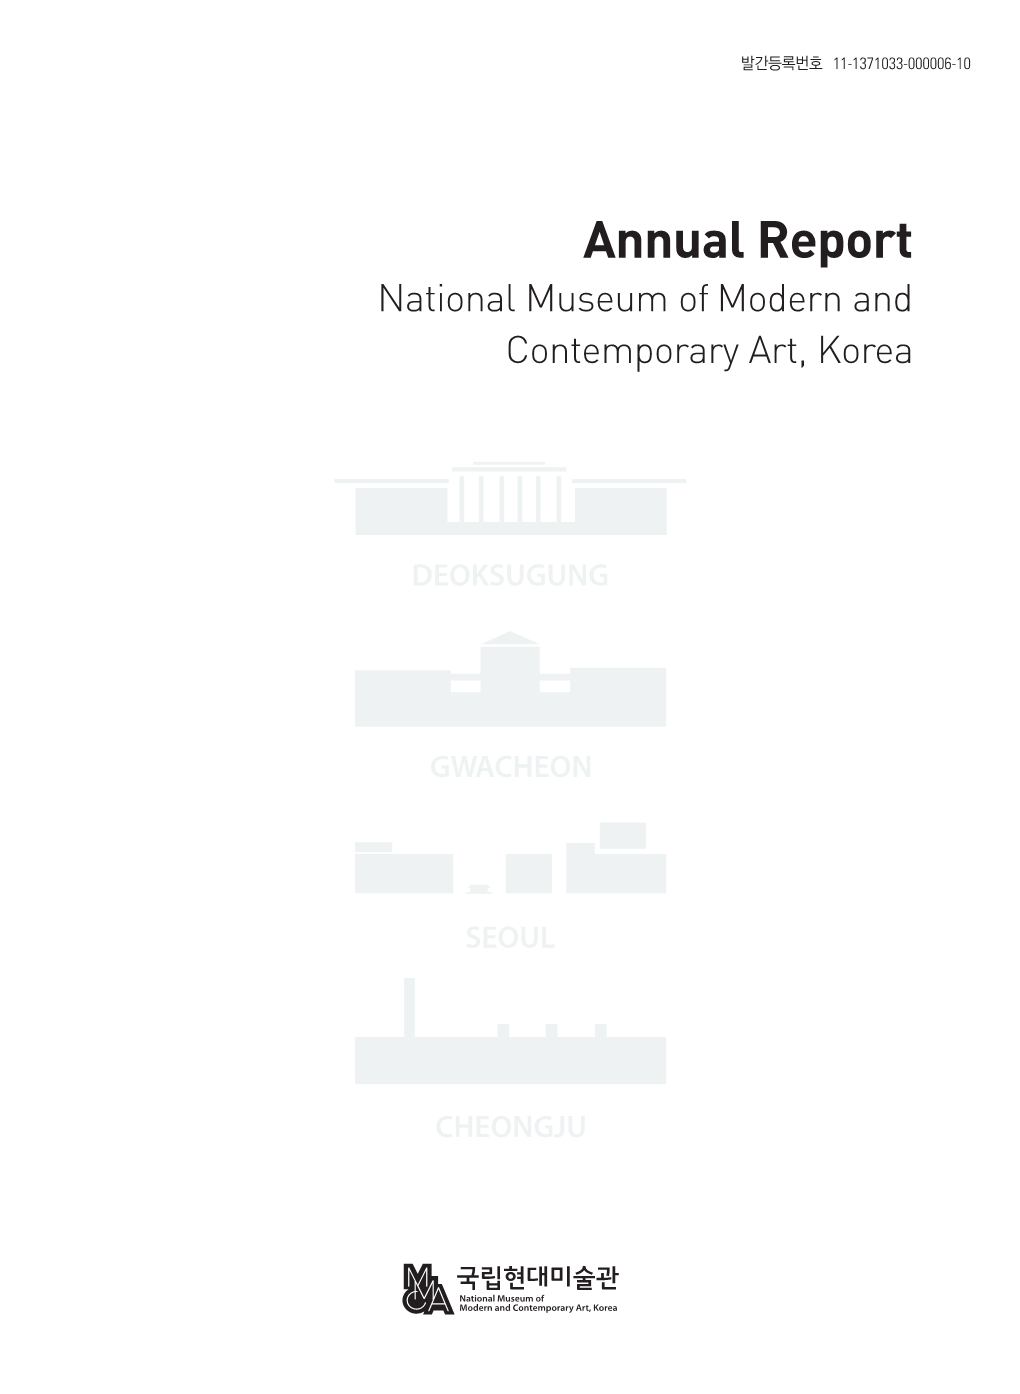 Annual Report National Museum of Modern and Contemporary Art, Korea